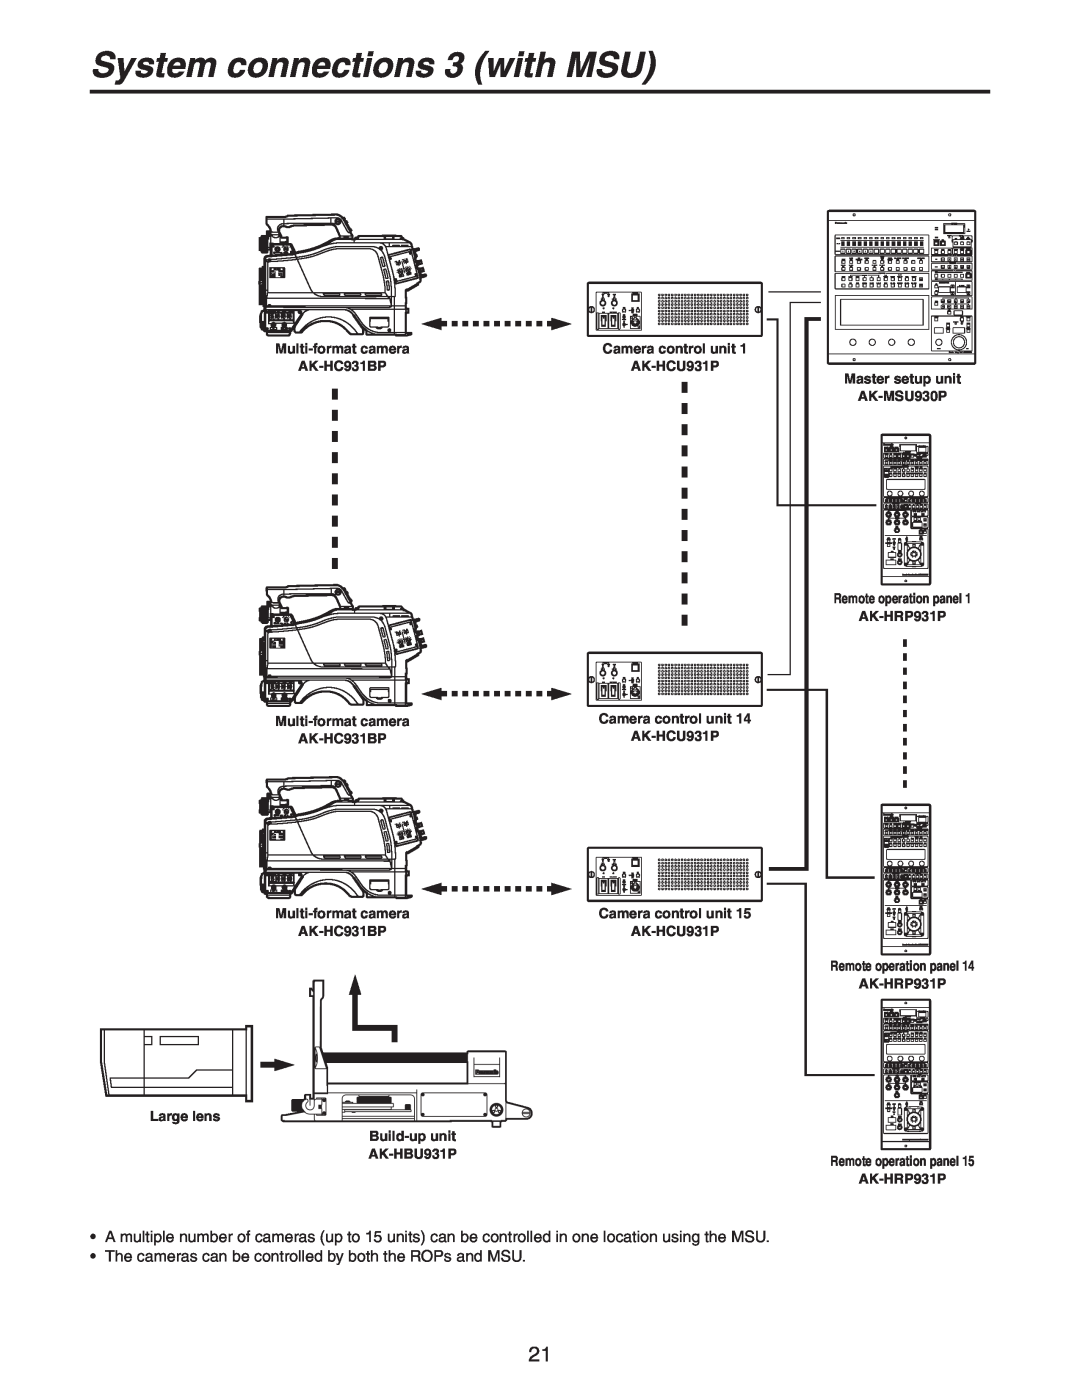 Panasonic AK-HC931BP manual System connections 3 with MSU, The cameras can be controlled by both the ROPs and MSU 